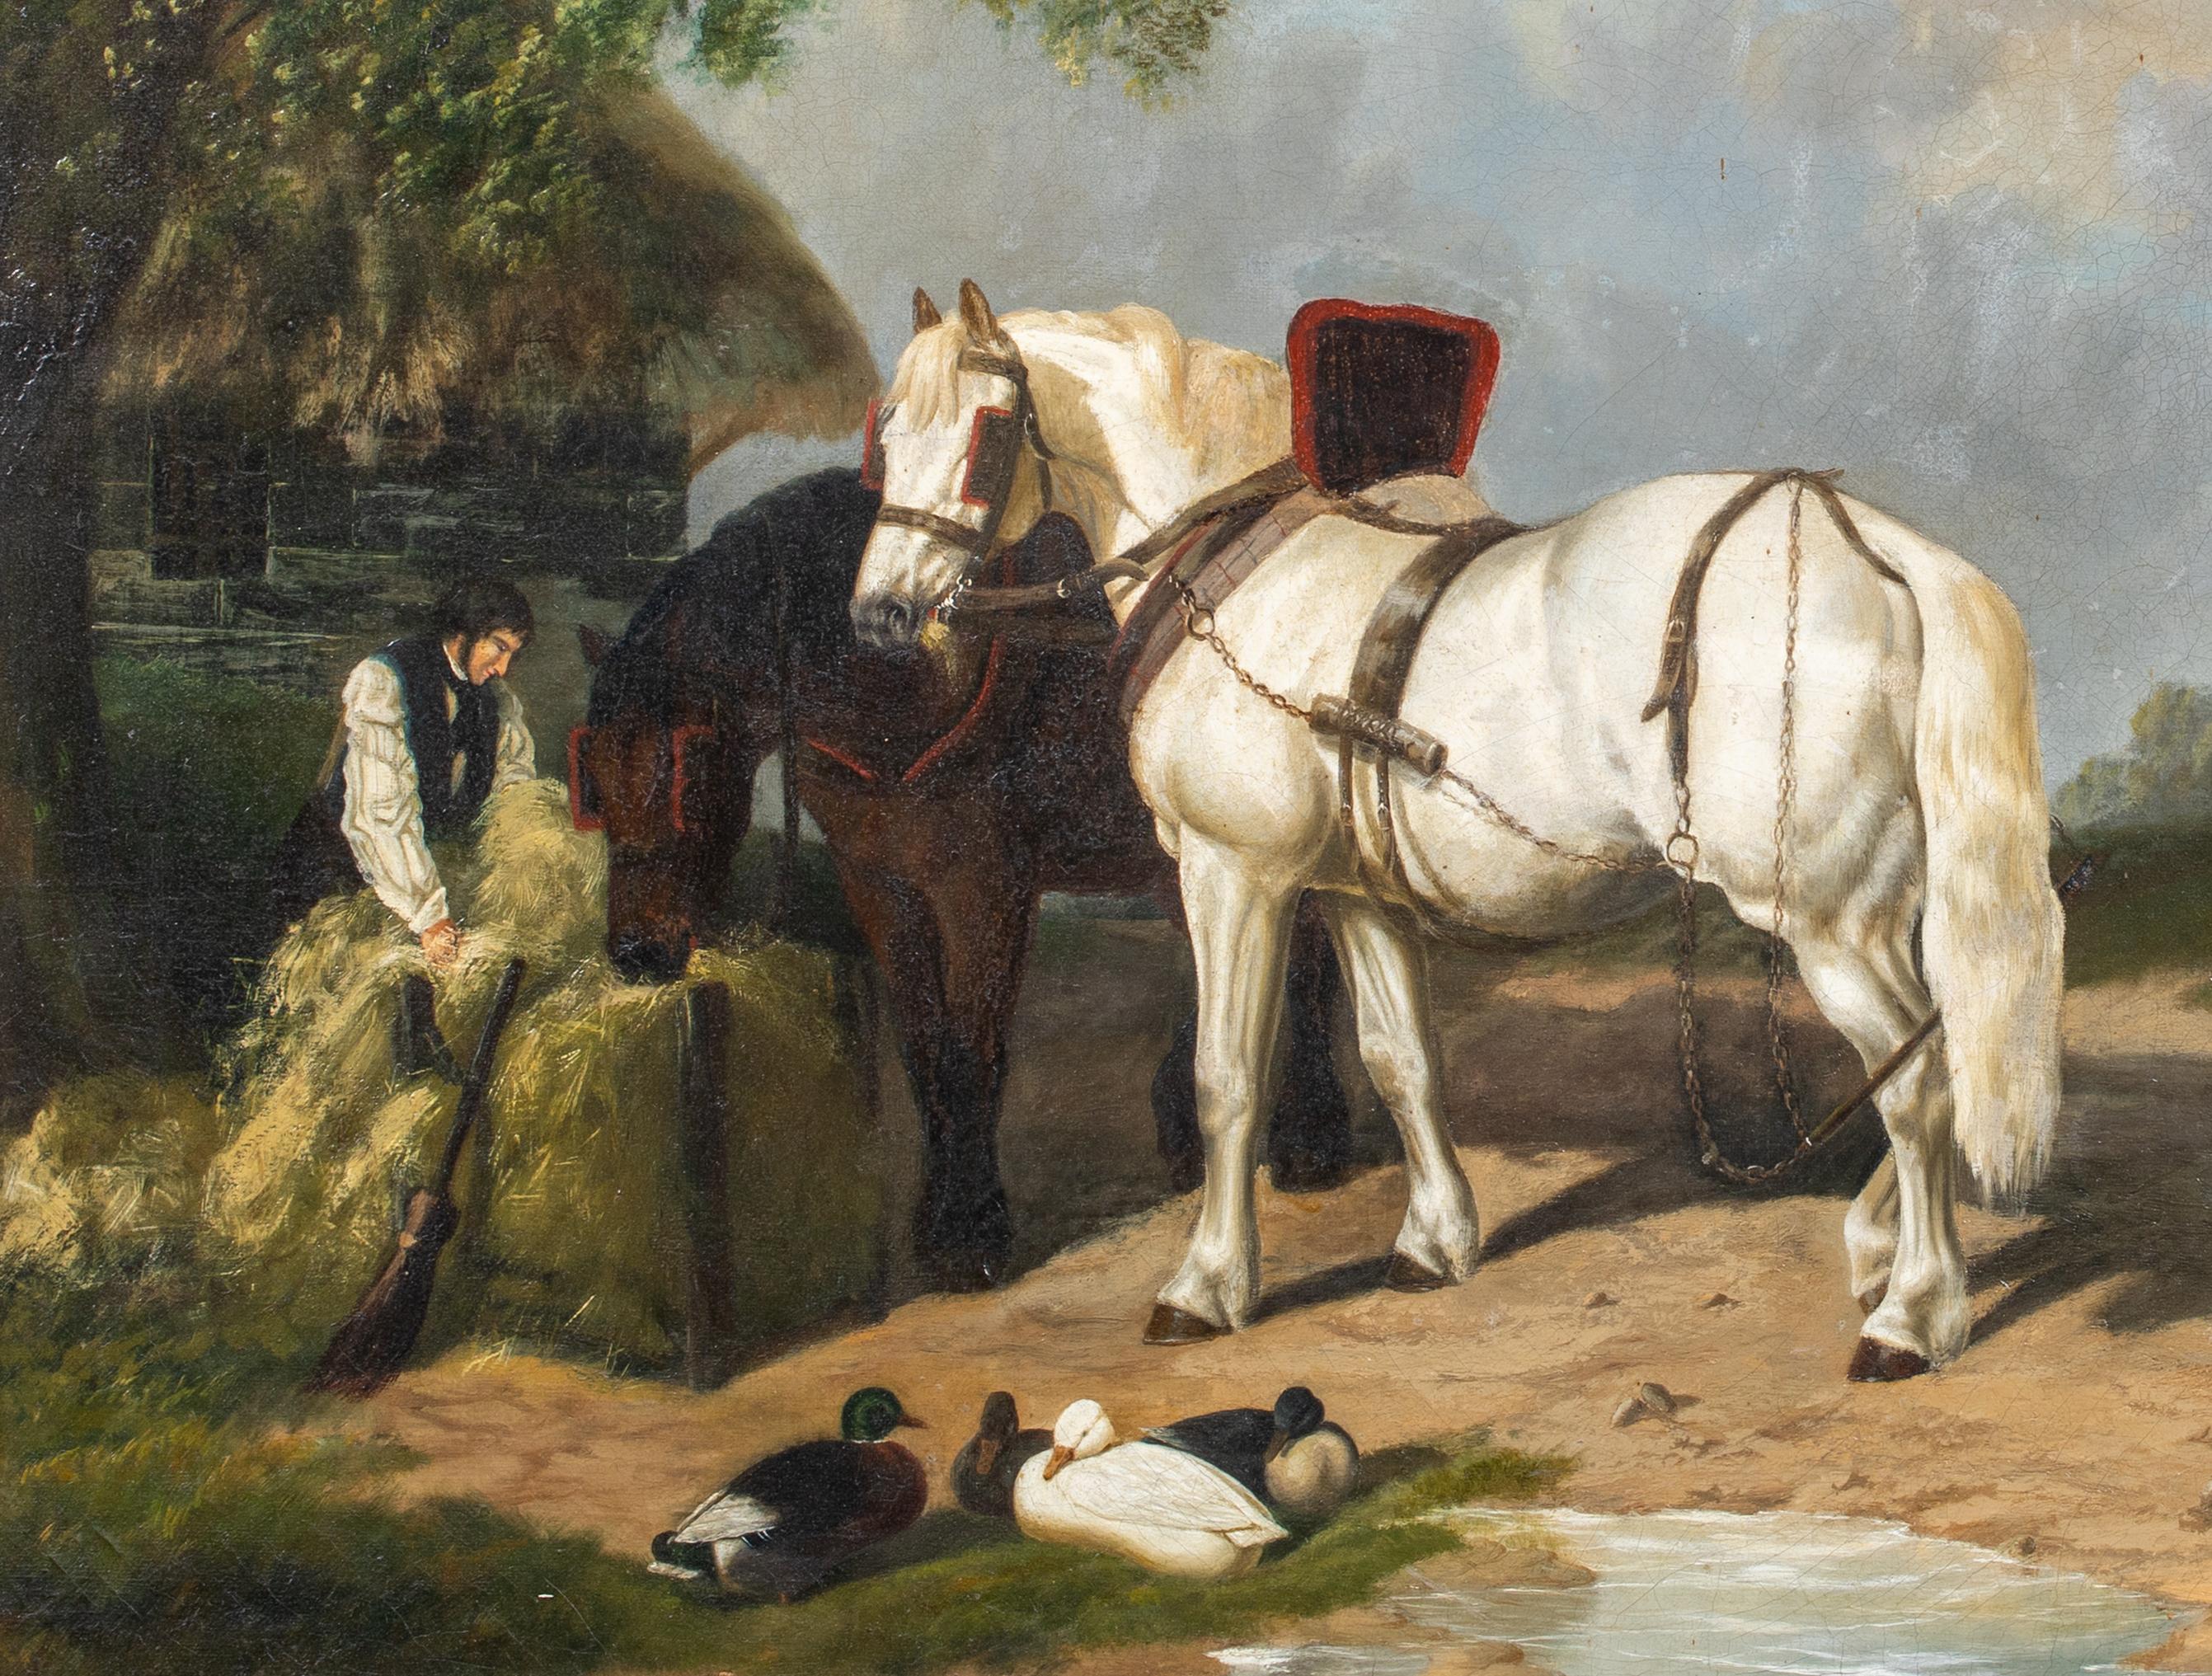 Feeding The Plough Horses, 19th Century

attributed to Edward Robert SMYTHE (1810-1899) 

Large 19th Century English farm scene of a farmer feeding his plough horses on the yard, oil on canvas. Excellent quality and condition identical to the works